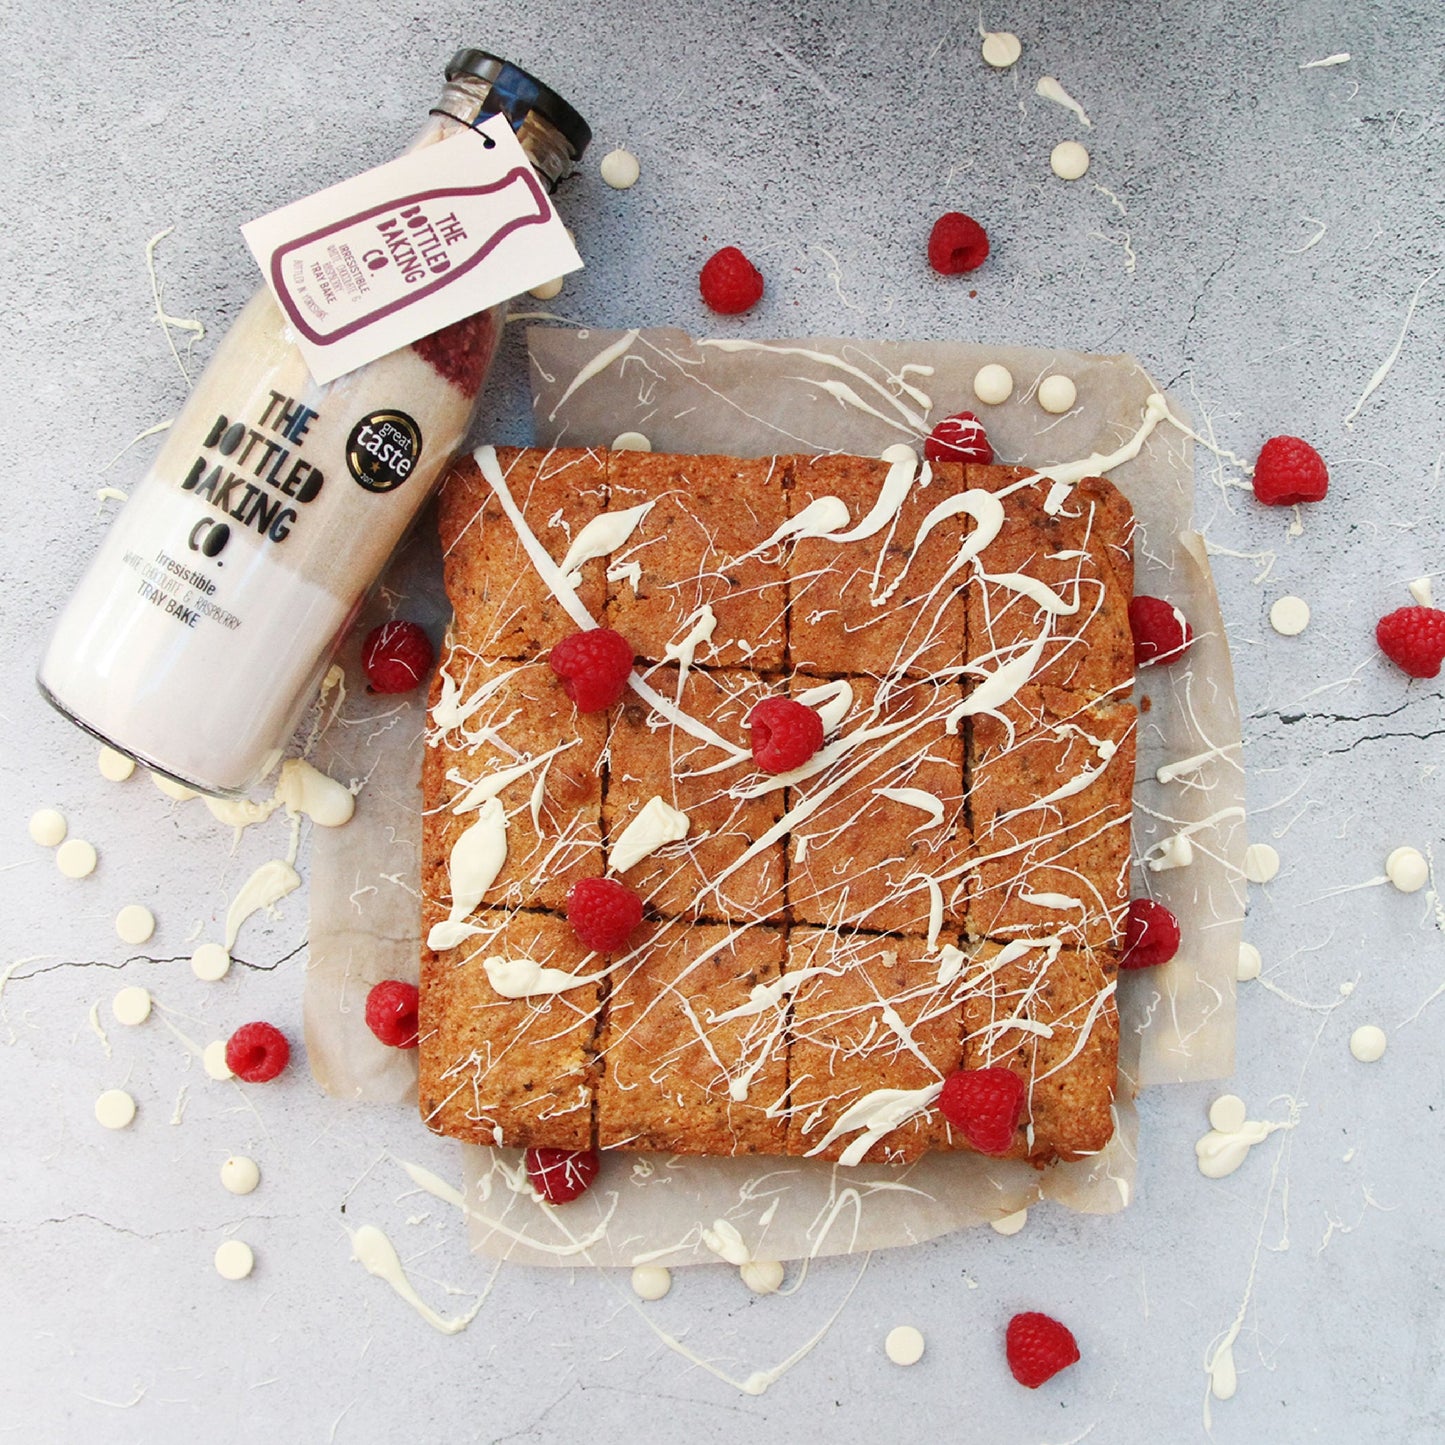 Irresistible White Chocolate & Raspberry Tray Bake cake mix in a Bottle